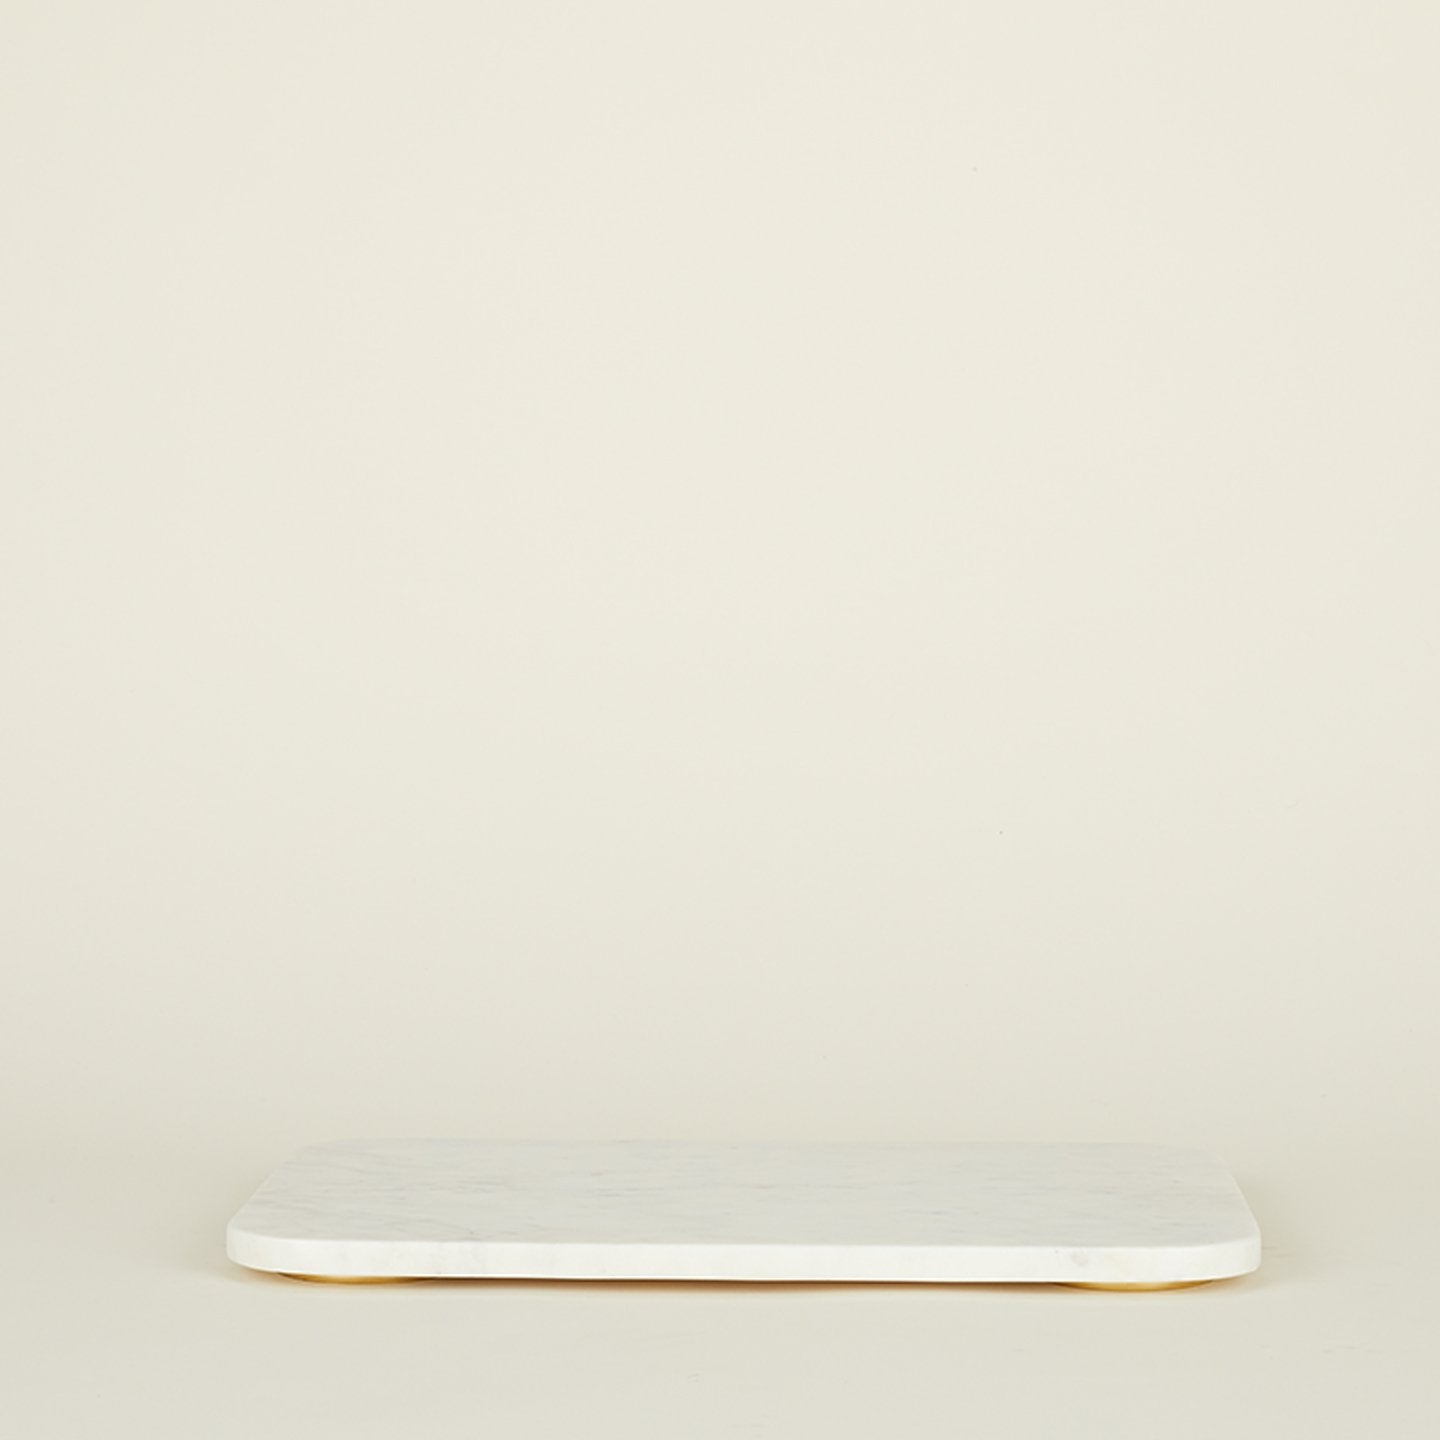 Simple Marble Serving Board - White